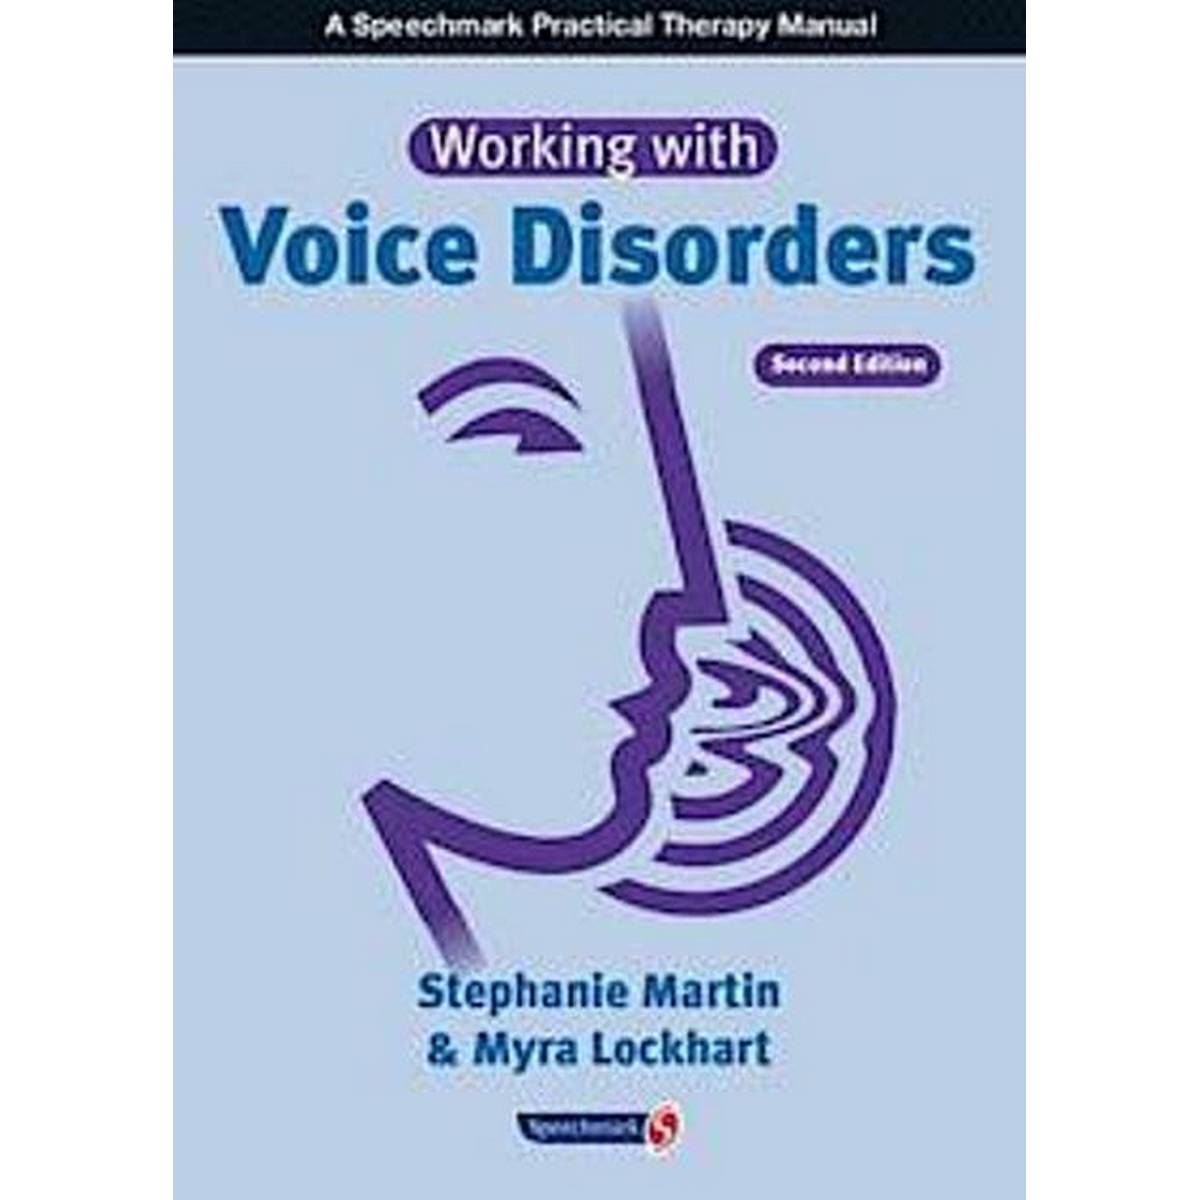 Working with Voice Disorders - 2nd Edition (2012)